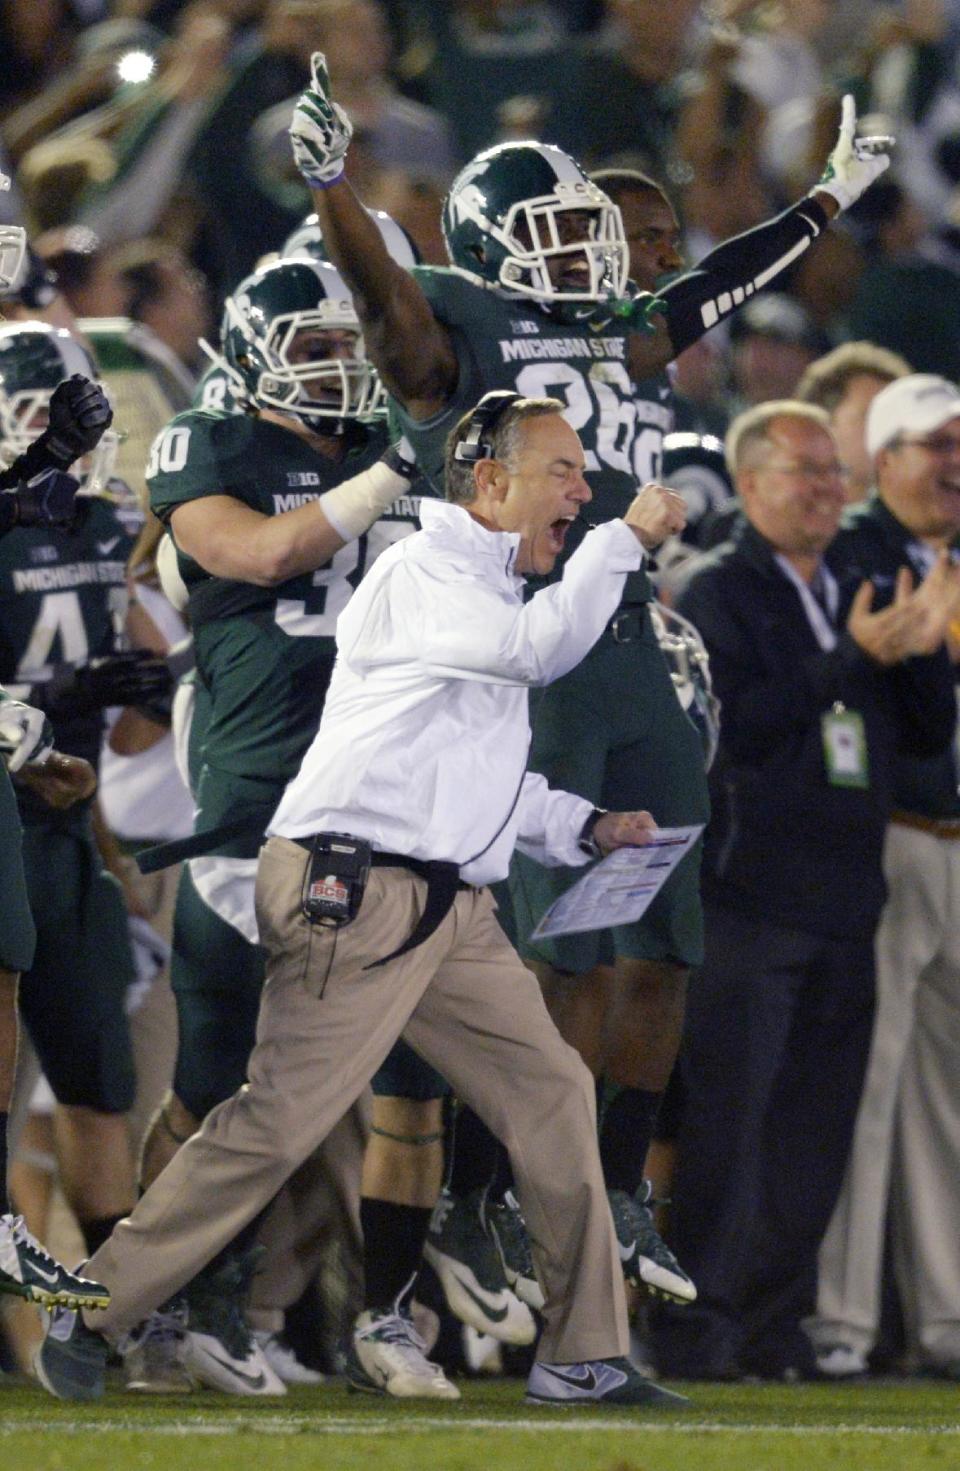 Michigan coach Mark Dantonio reacts to a turnover by Stanford during the second half of the Rose Bowl NCAA college football game Wednesday, Jan. 1, 2014, in Pasadena, Calif. Michigan State won 24-20. (AP Photo/Mark J. Terrill)